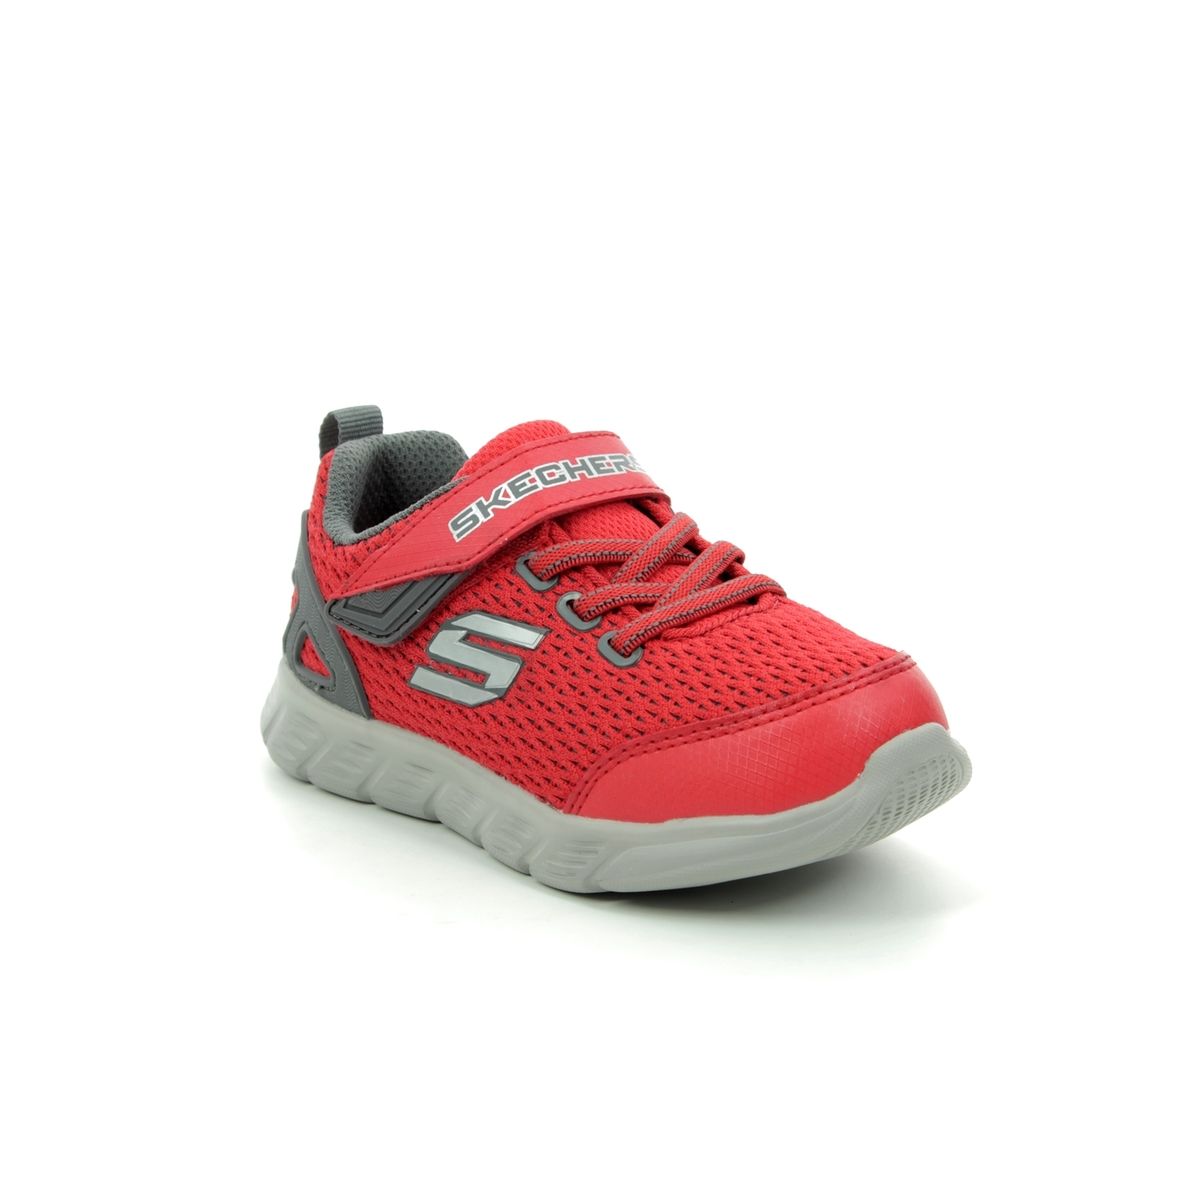 skechers shoes red